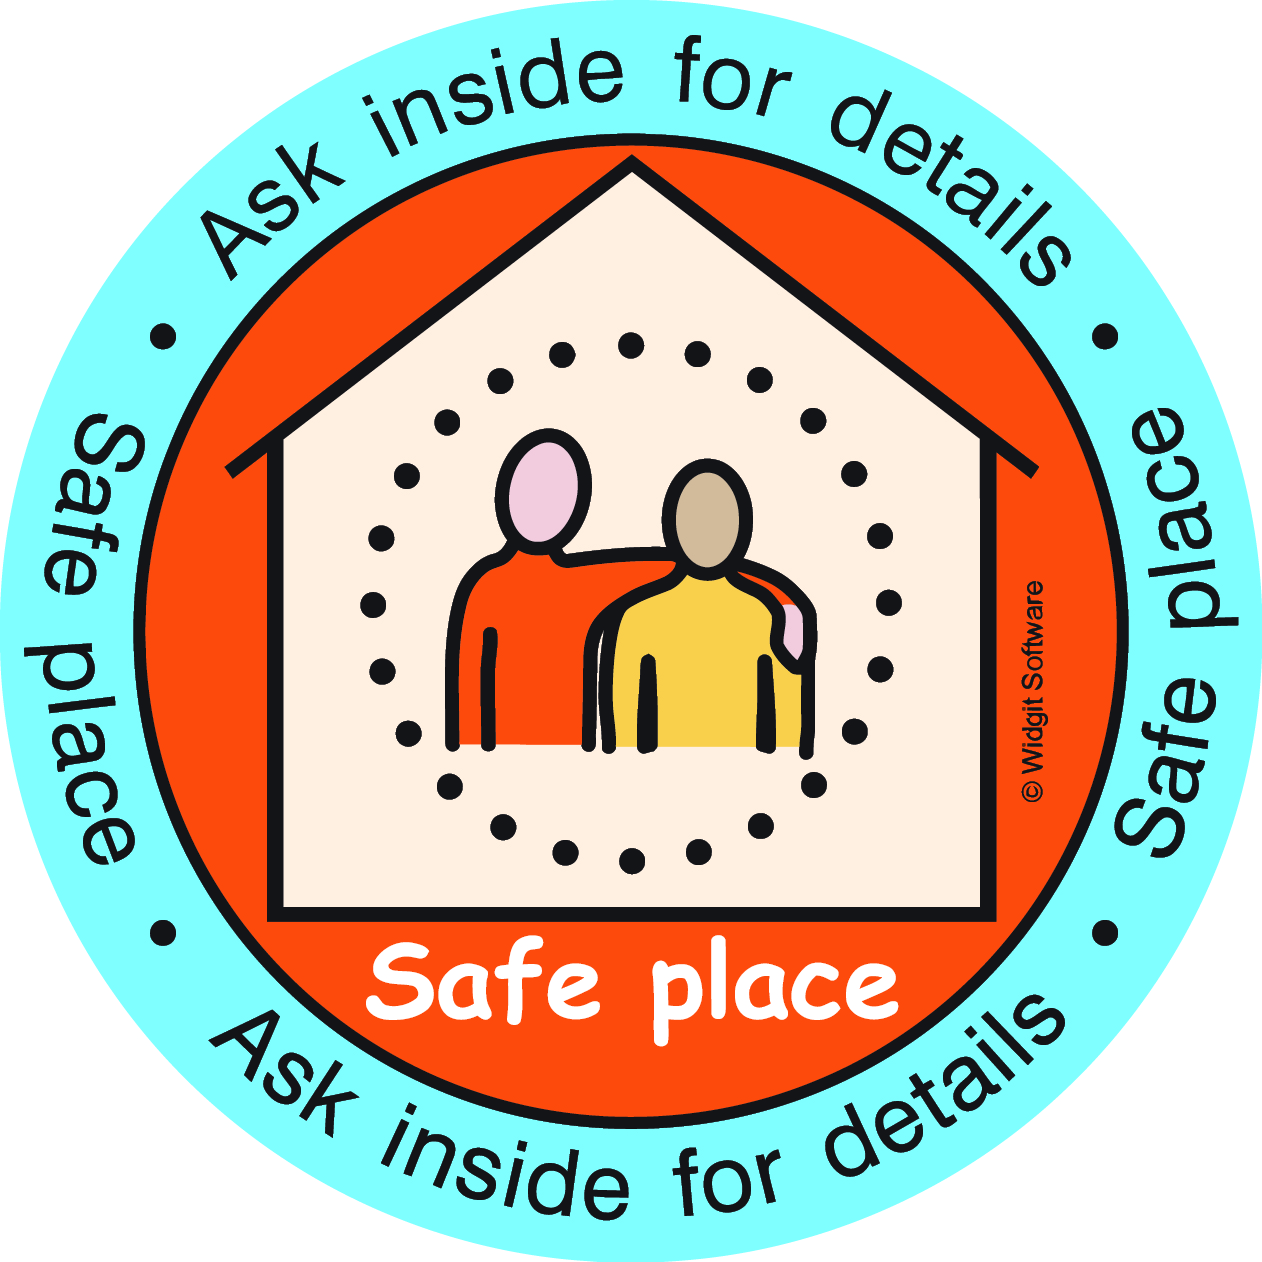 Learn about the Safe Places scheme